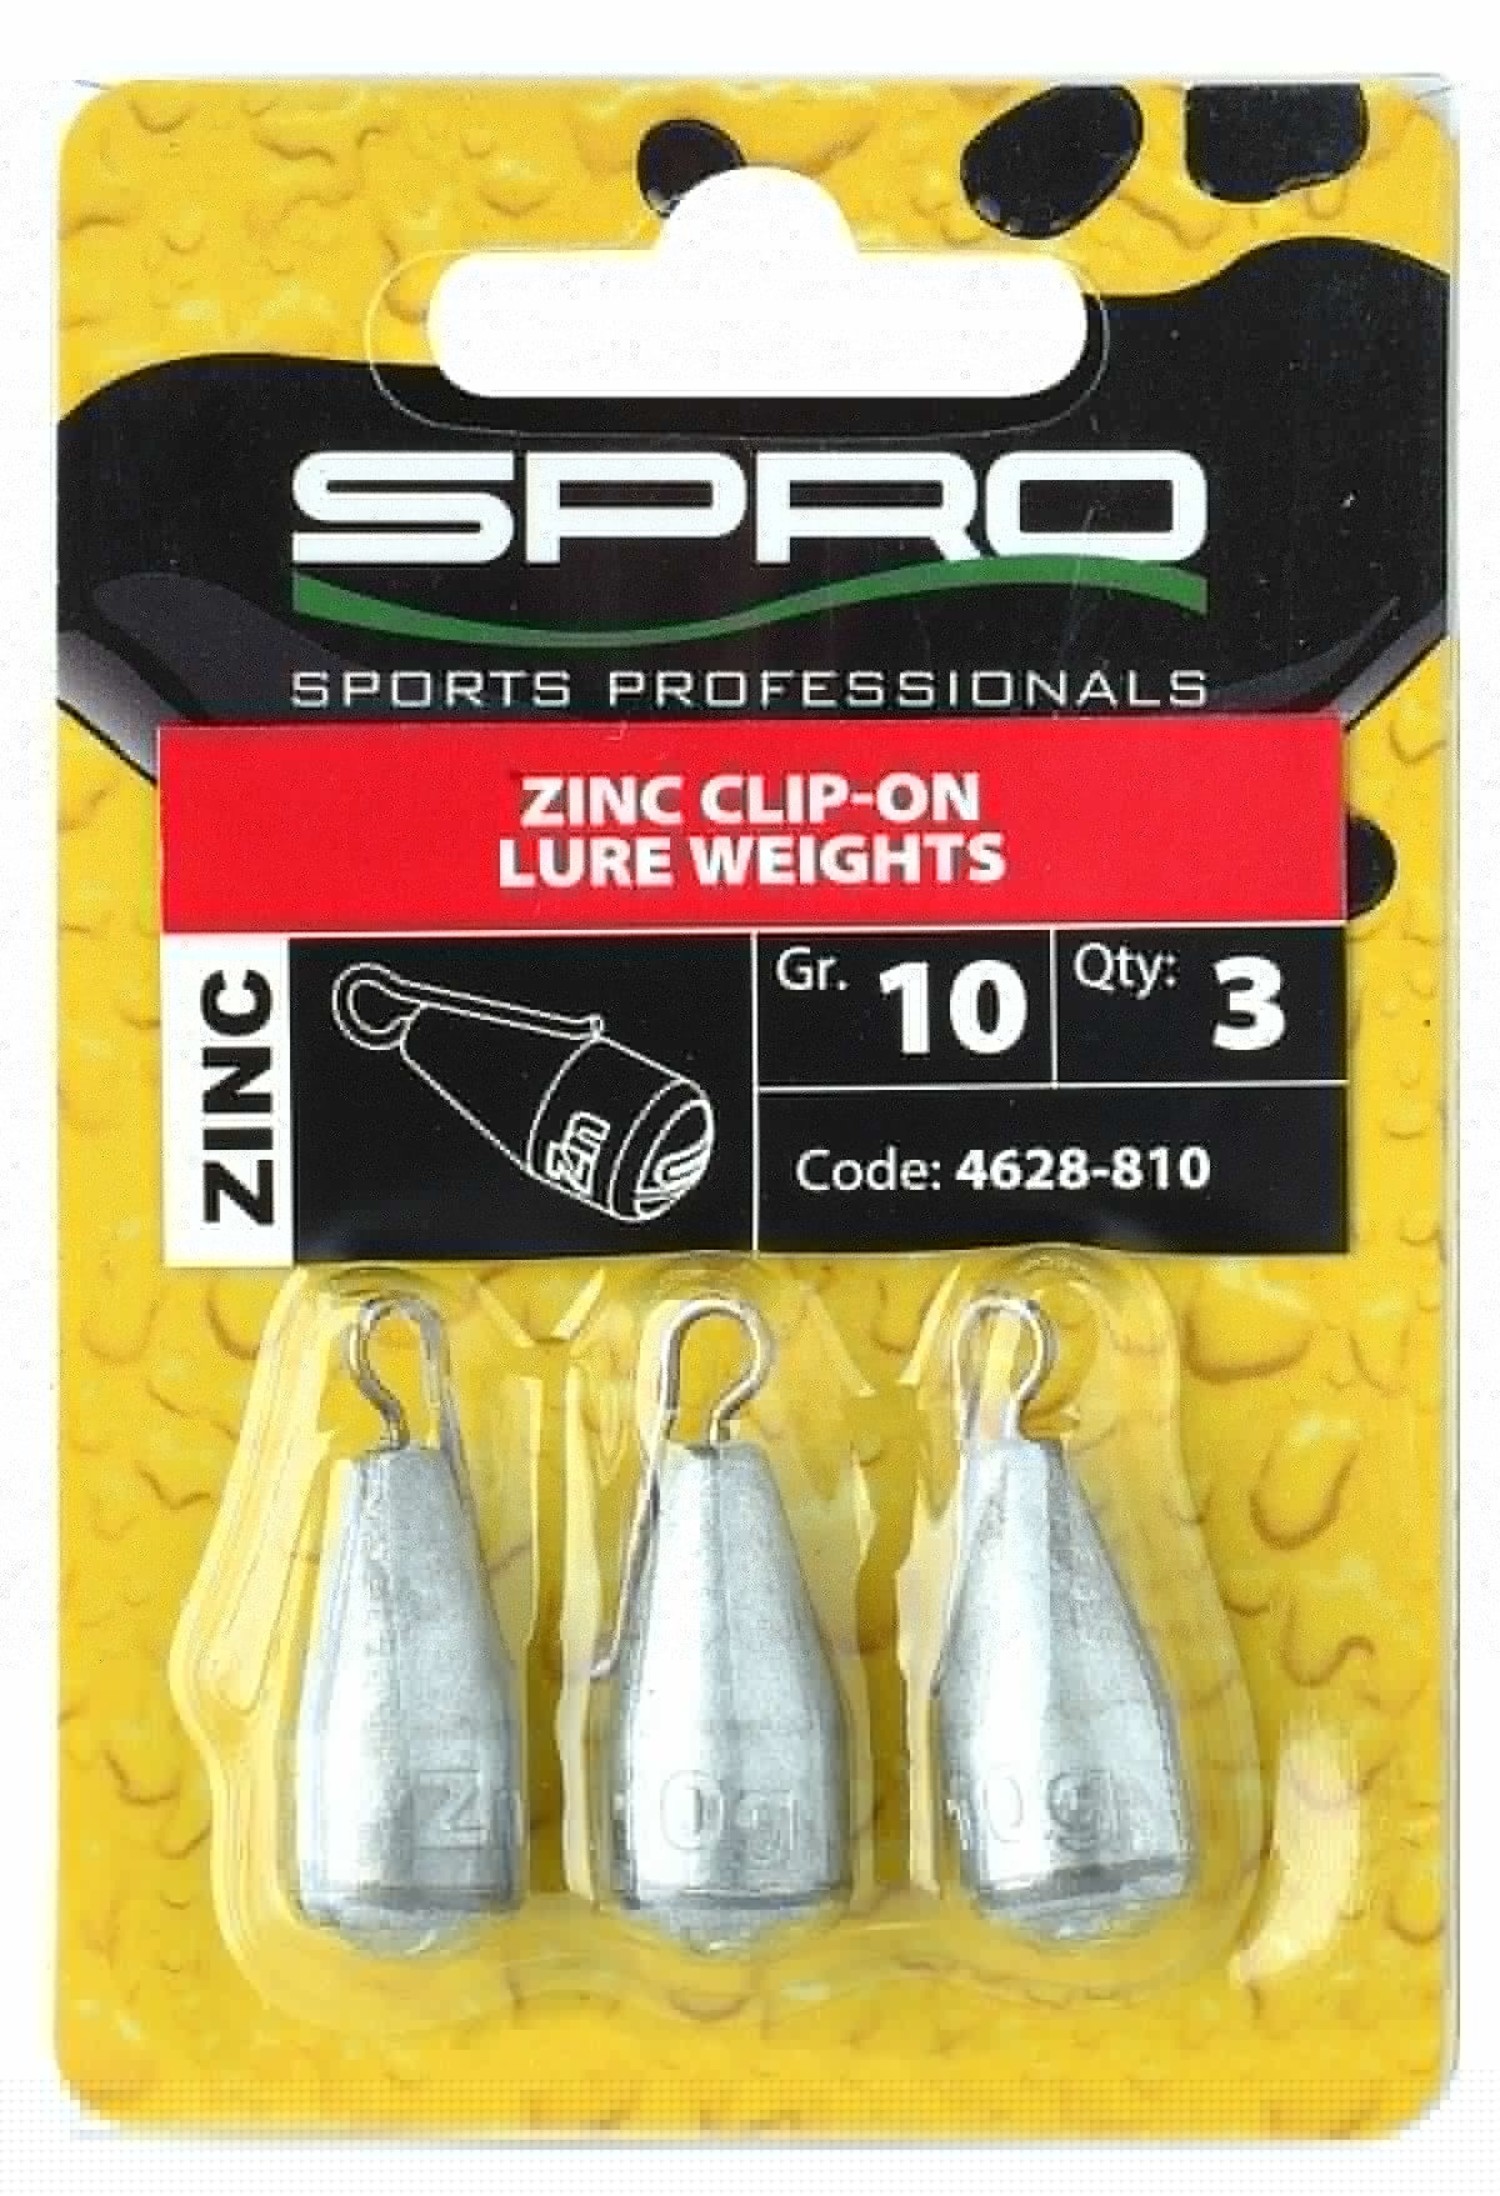 Spro Zinc Clip-On Lure Weight (3pcs)